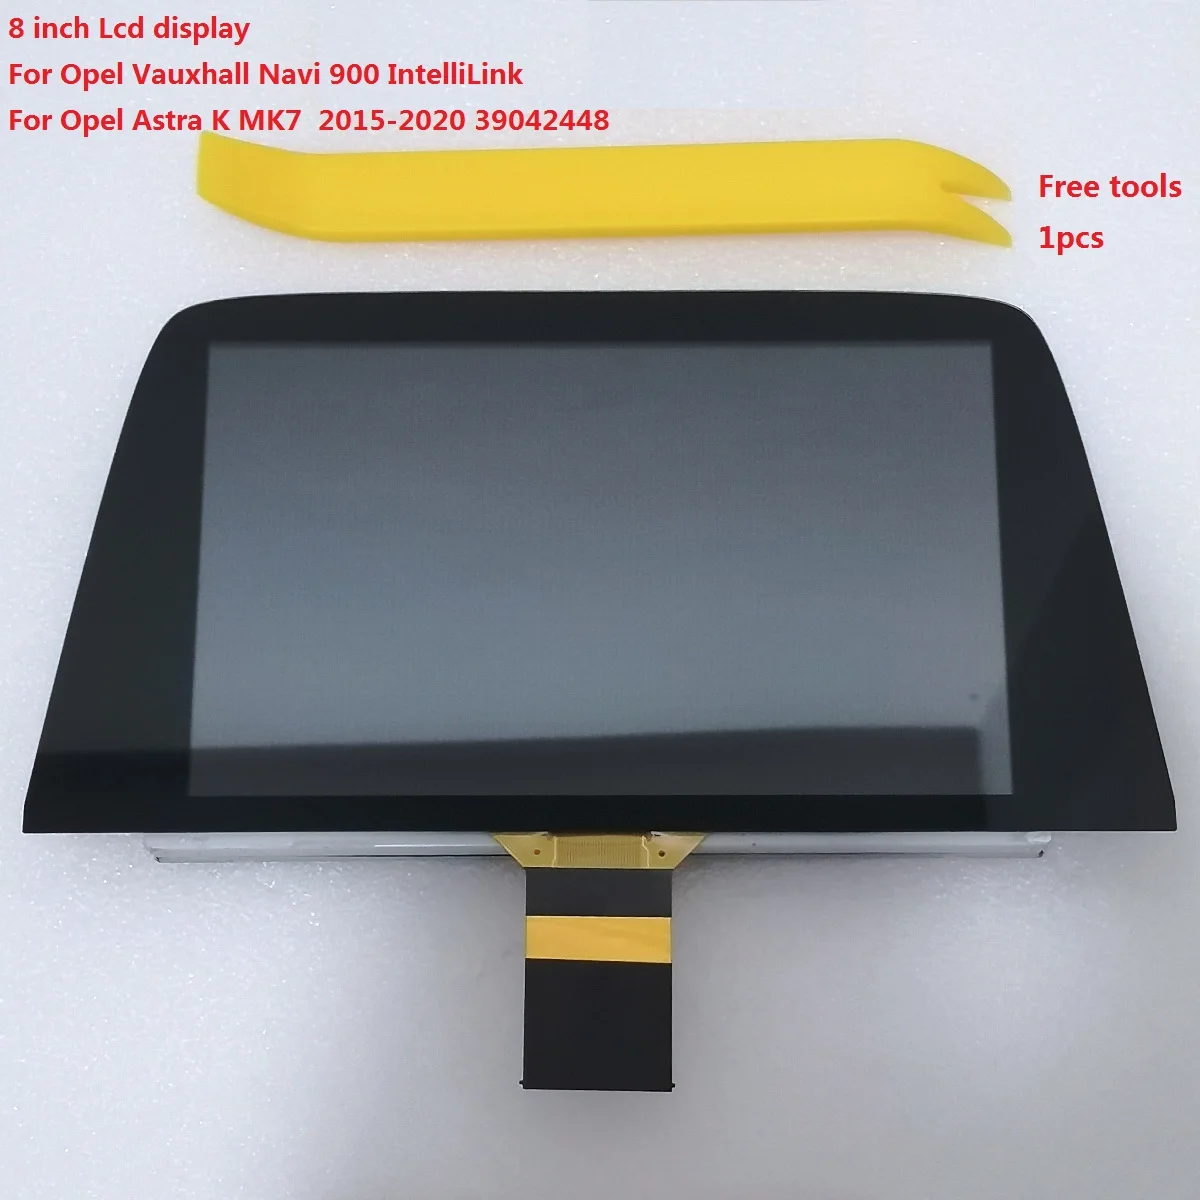 8 inch LCD with Touch panel For Opel Vauxhall Navi 900 IntelliLink NAVI RADIO For Opel Astra K MK7 2015-2020 39042448